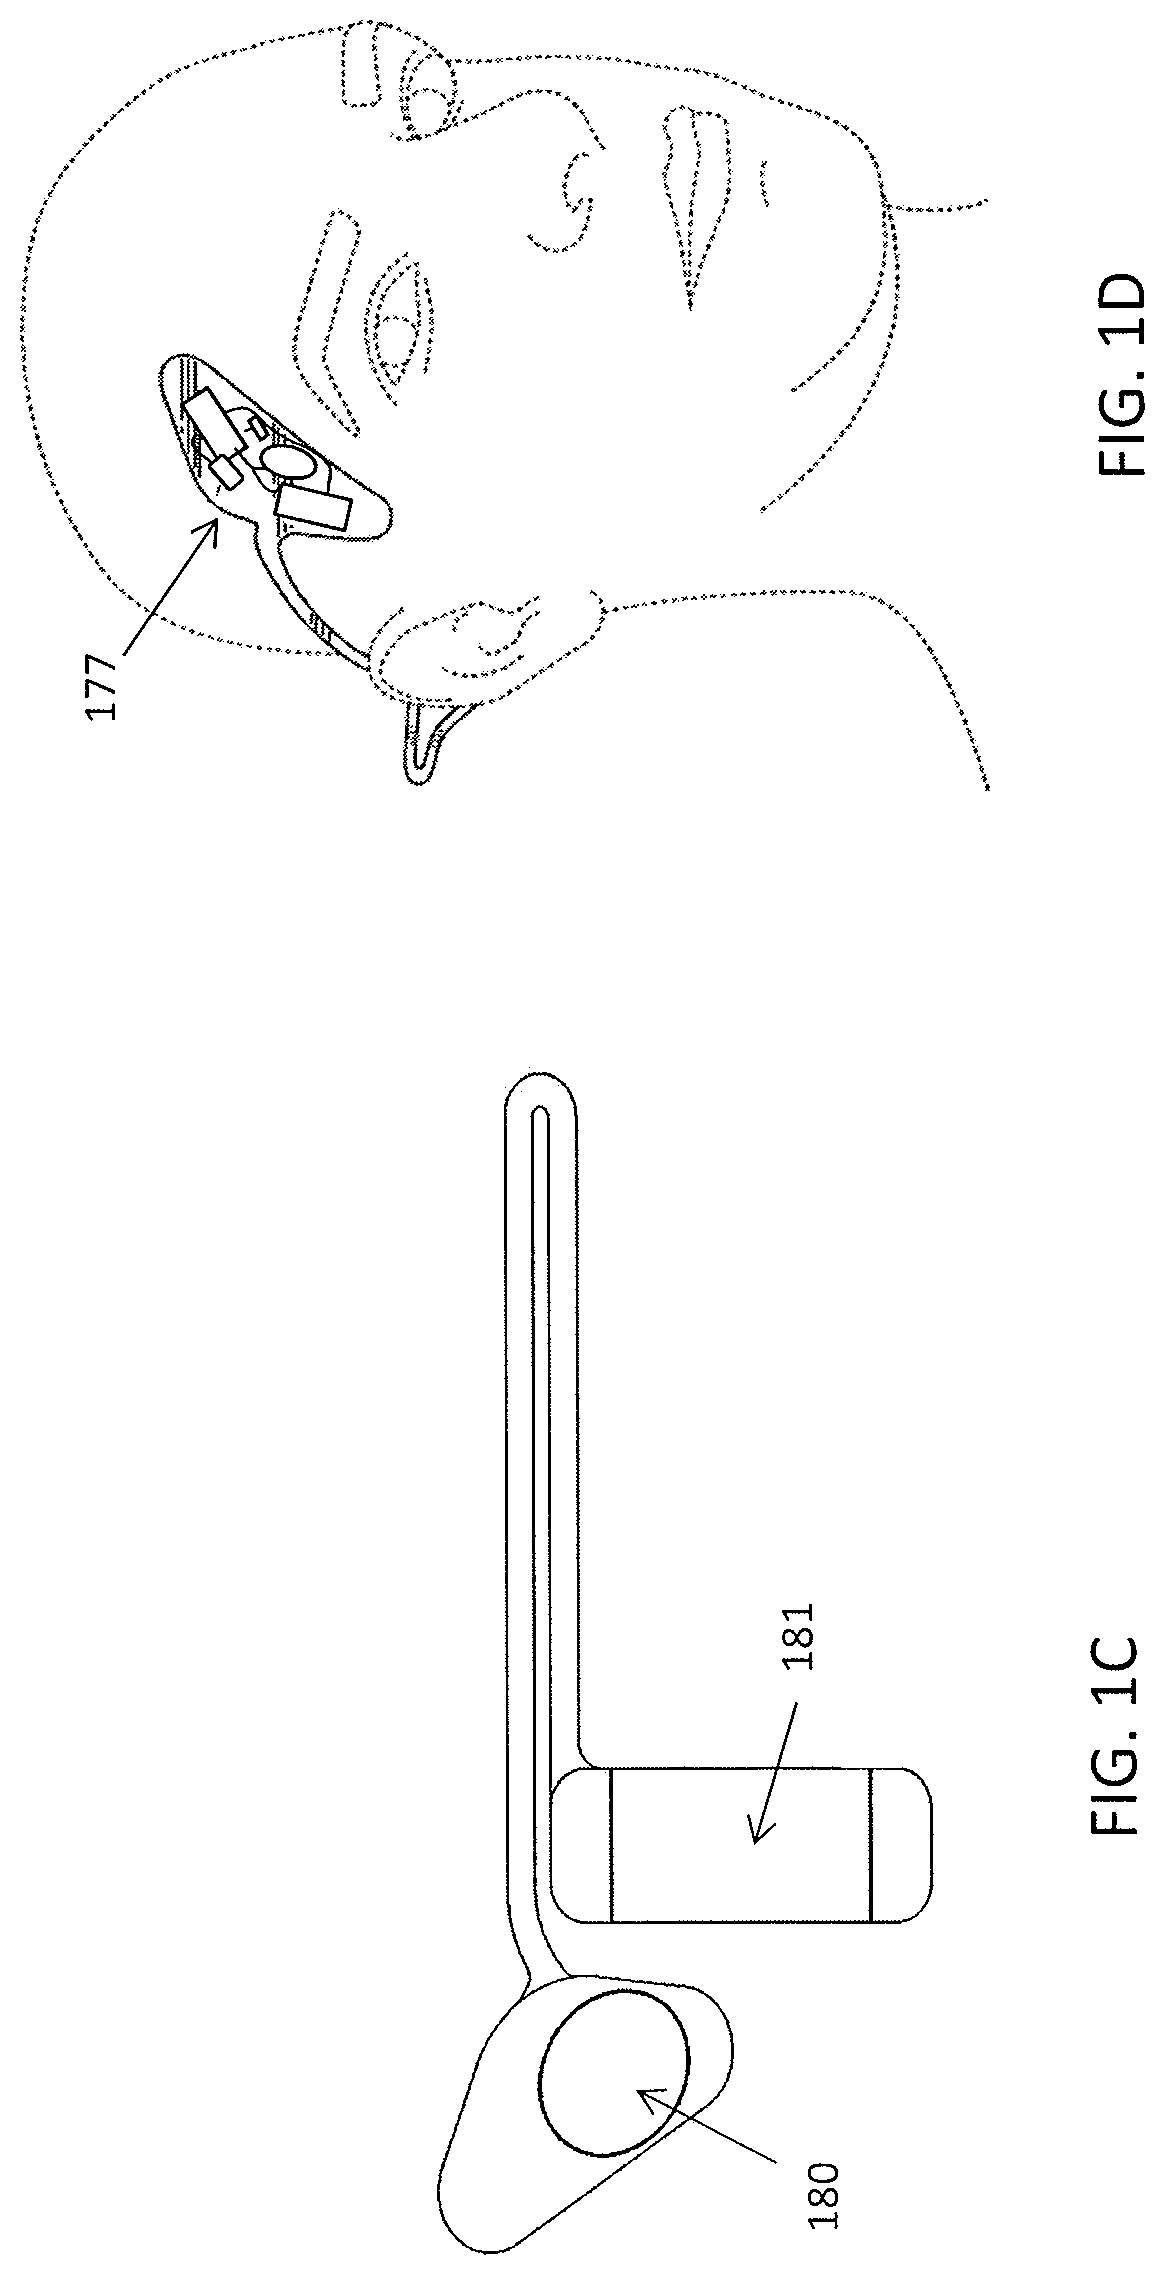 Methods and apparatuses for transdermal electrical stimulation